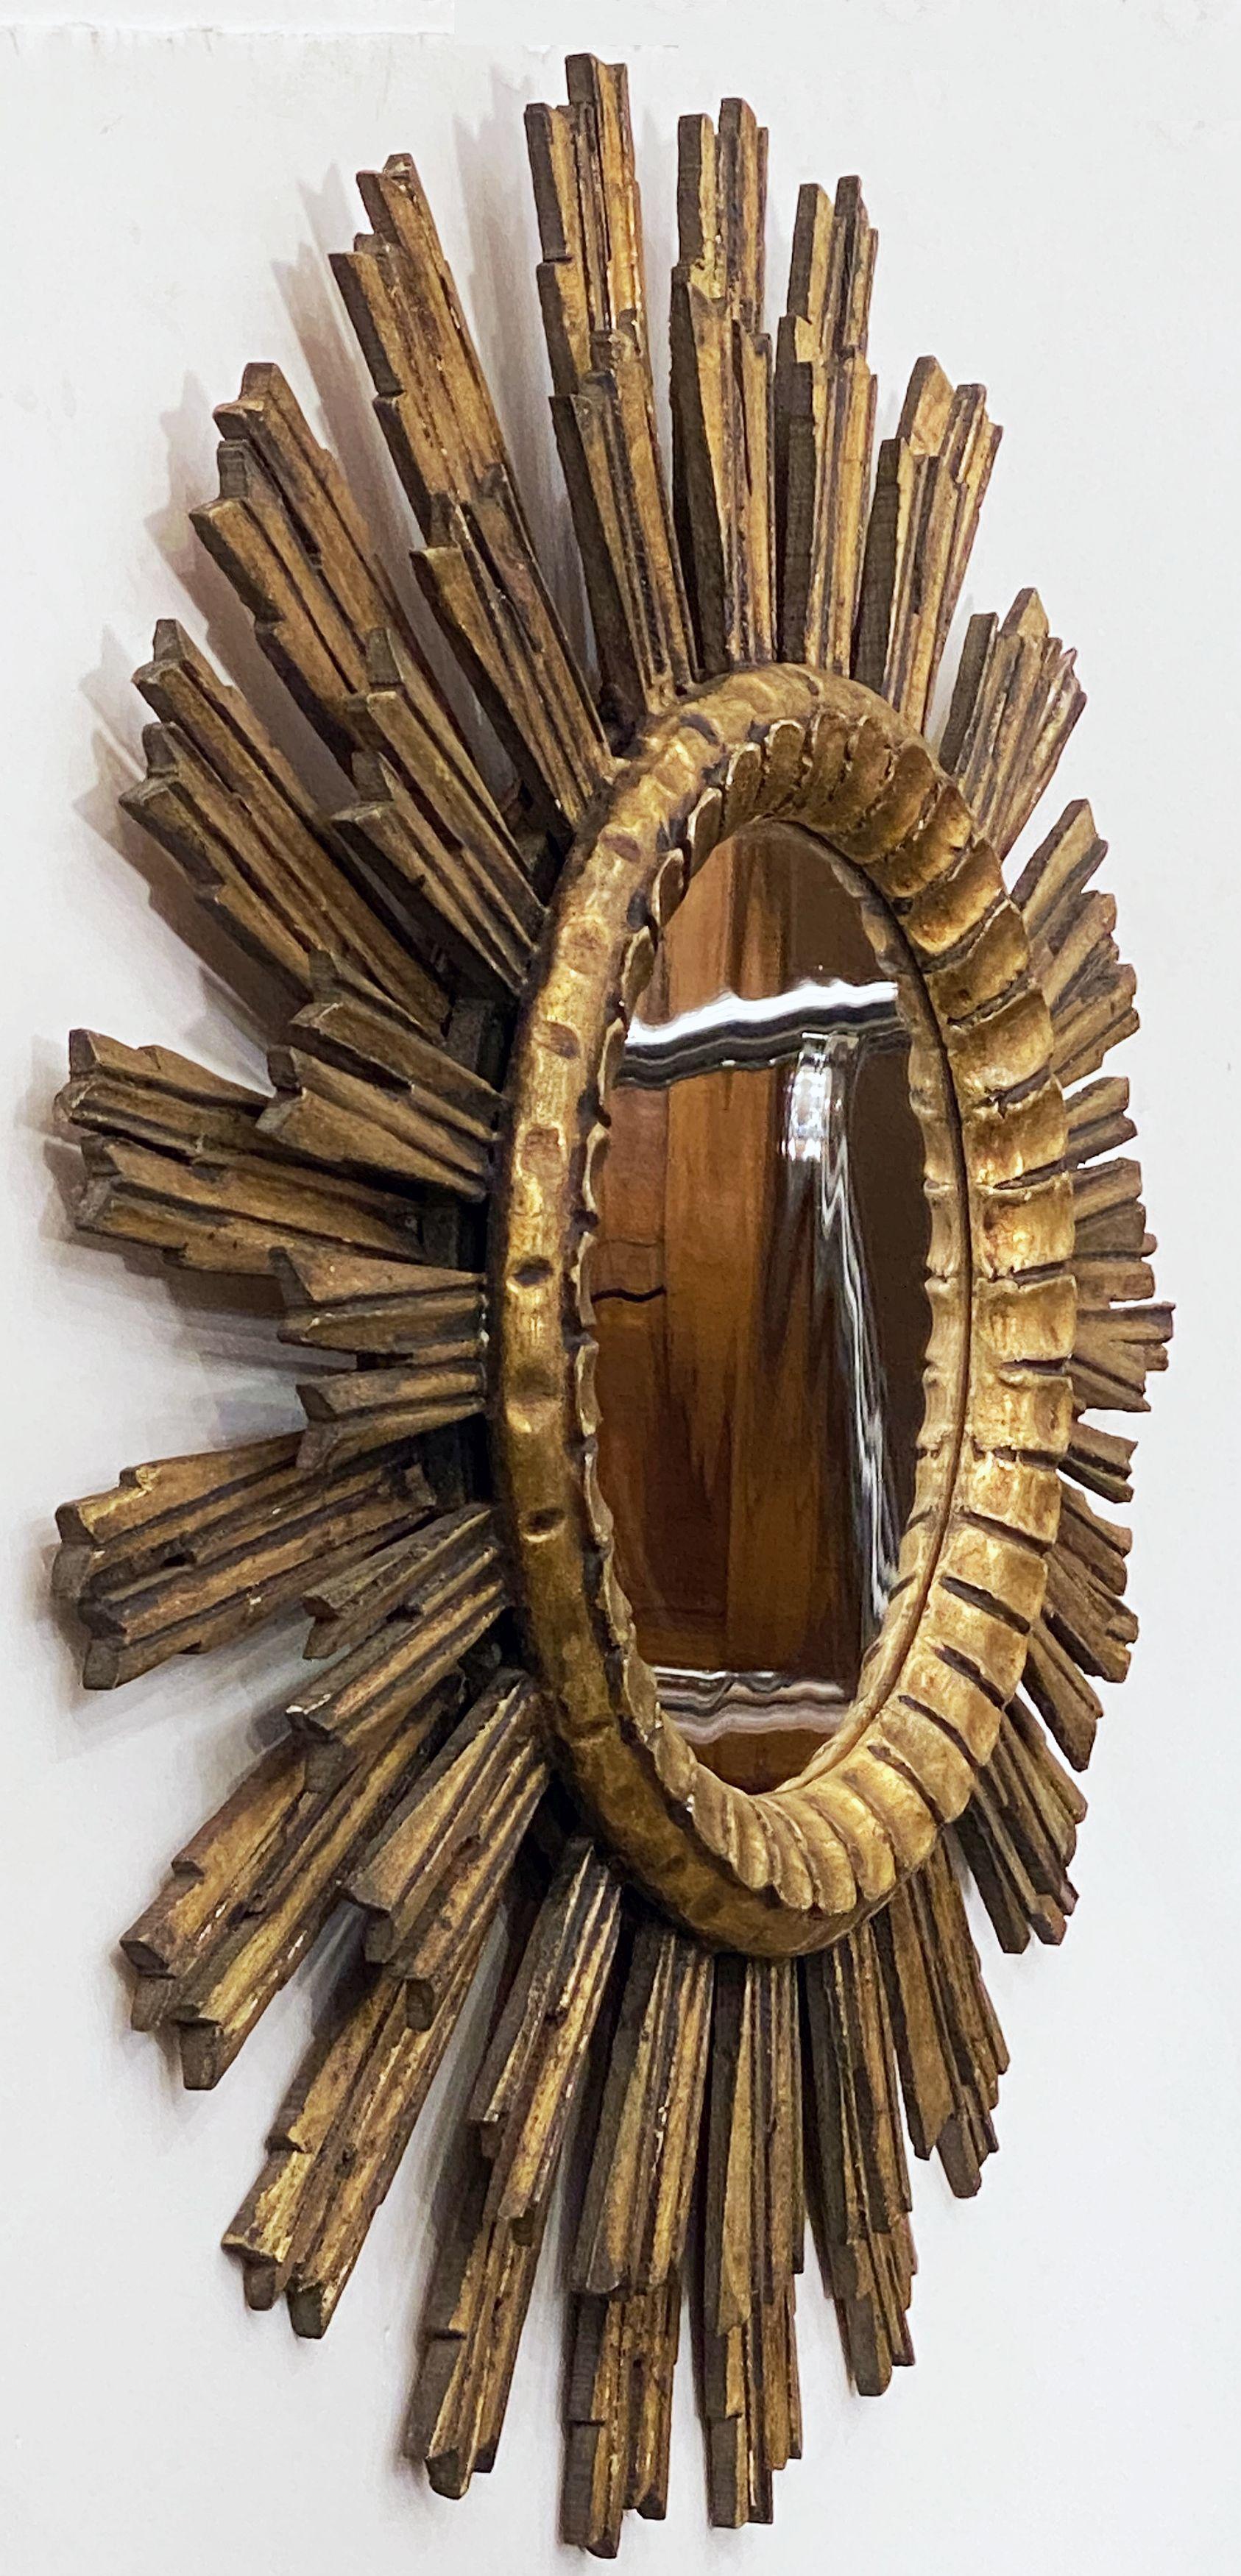 A lovely French gilt sunburst (or starburst) mirror with a double row of gilded wooden rays arranged around the original glass mirror plate glass center.

Outside diameter is 24 1/2 inches

Diameter of interior mirror is 9 1/2 inches